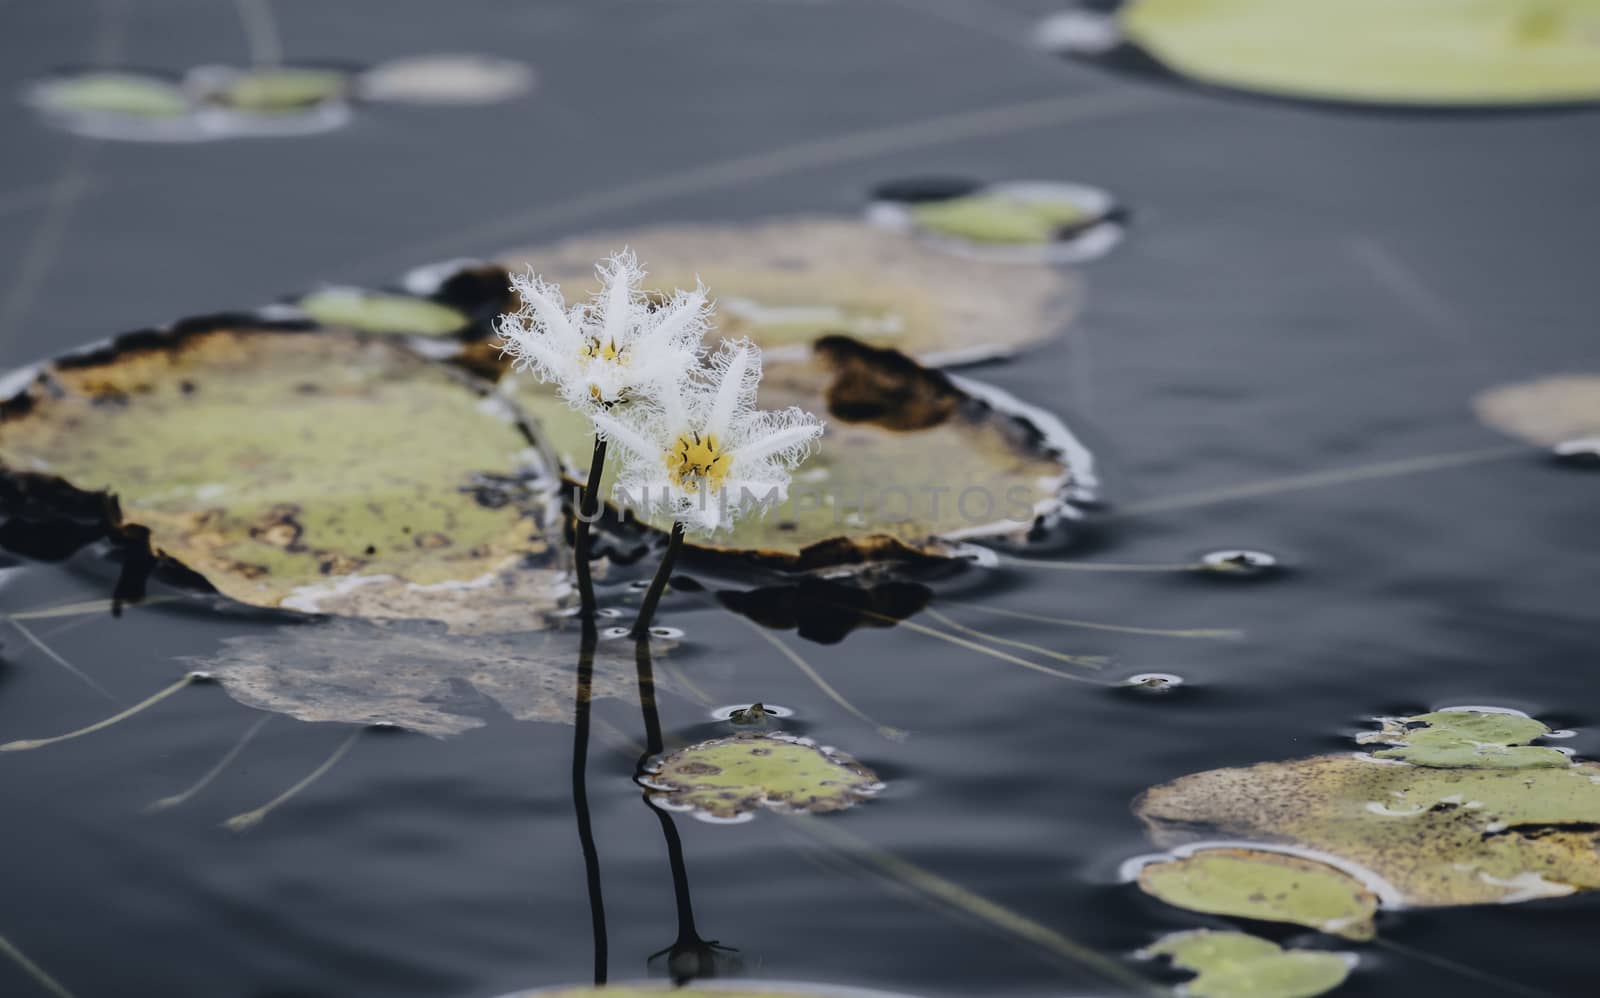 Nymphoides aquatic flowering plants well known as kumudu flowers in Hiyare Reservoir by nilanka